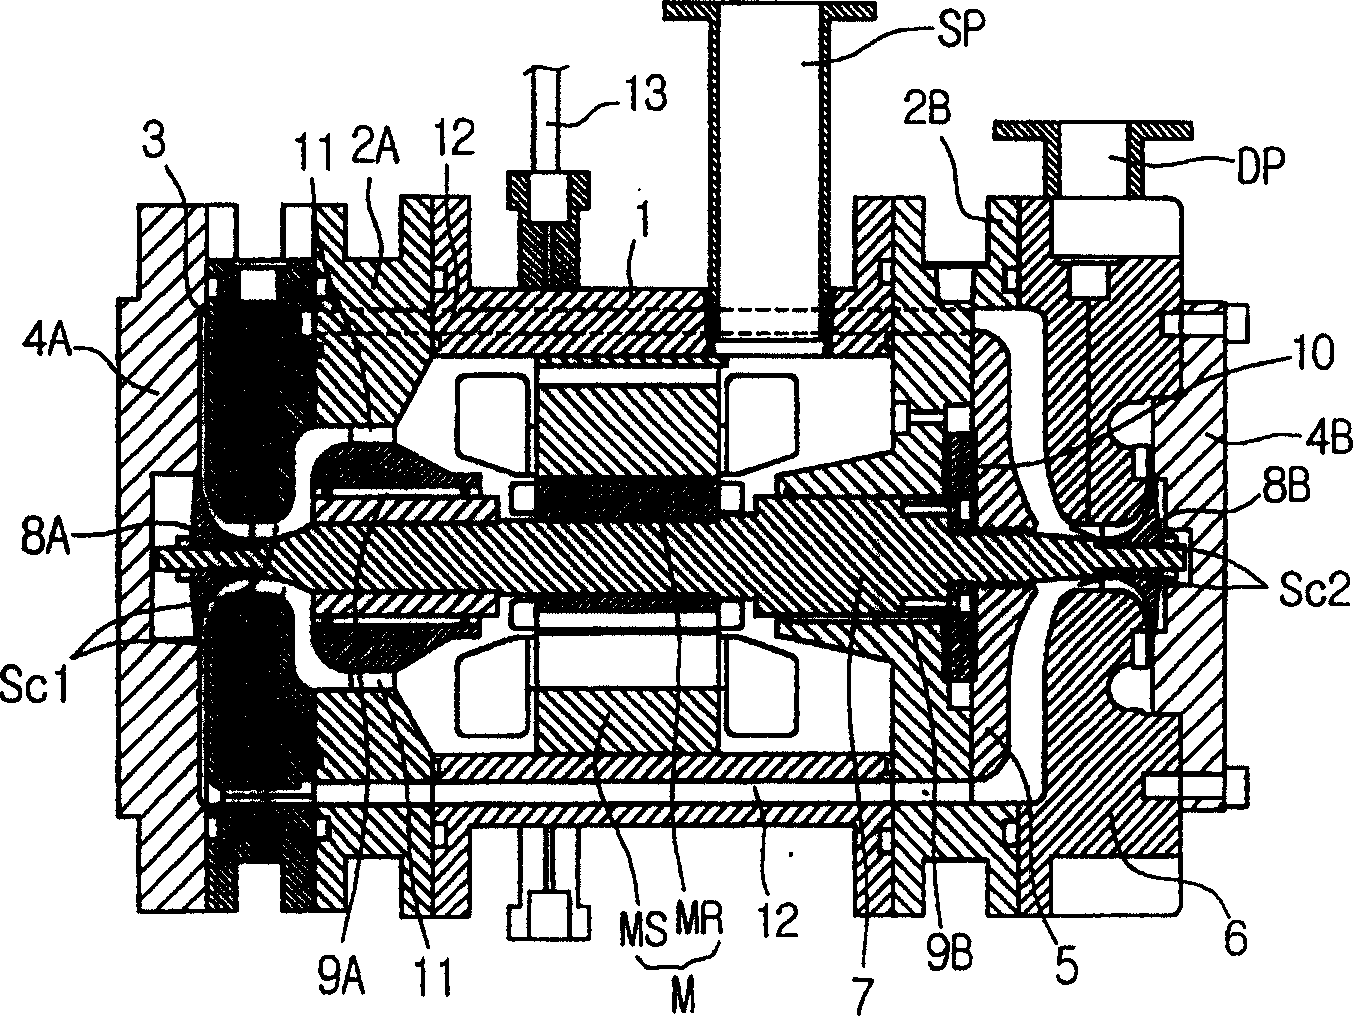 Structure for preventing centrifugal compressor from reverse rotation